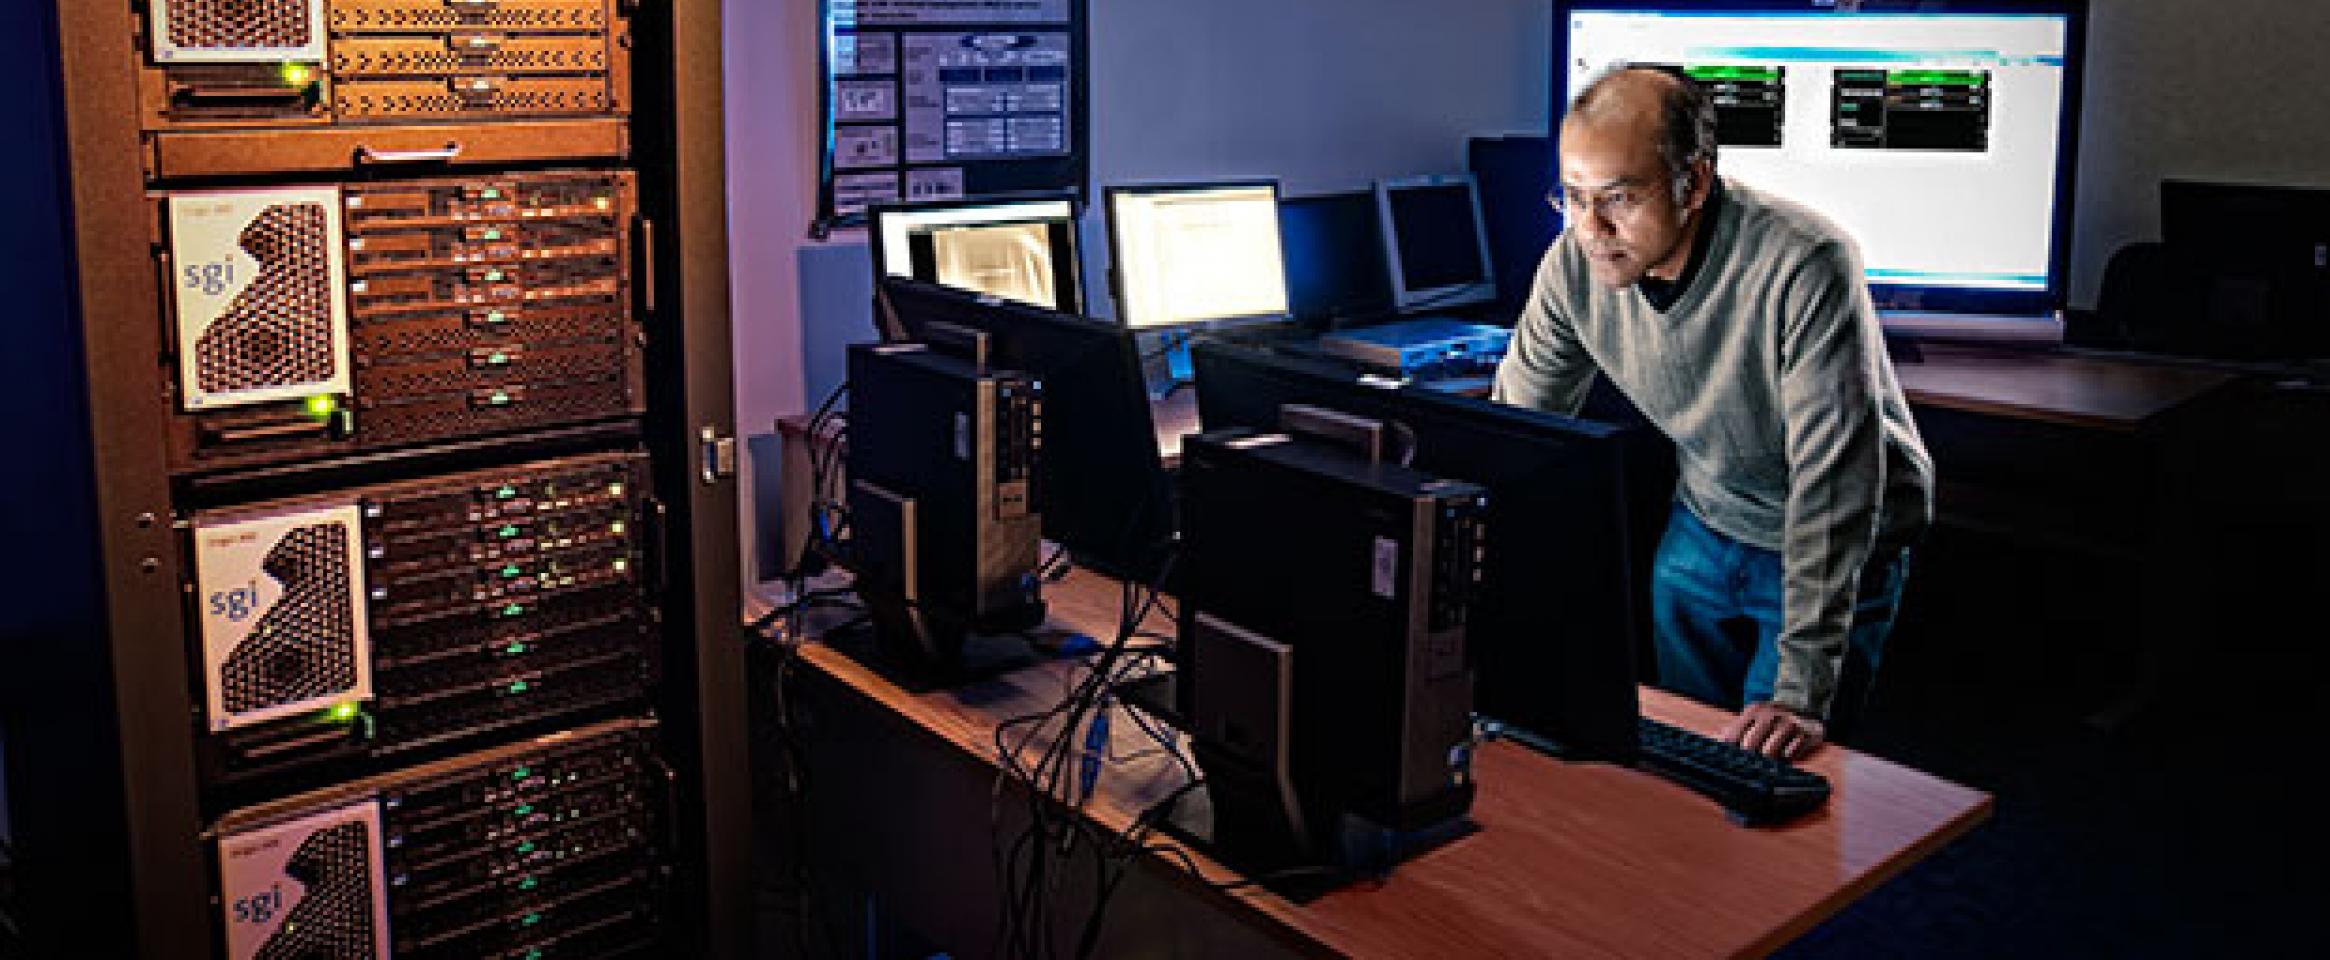 Photograph of a man working in a dimly lit office full of computer server banks and screens.